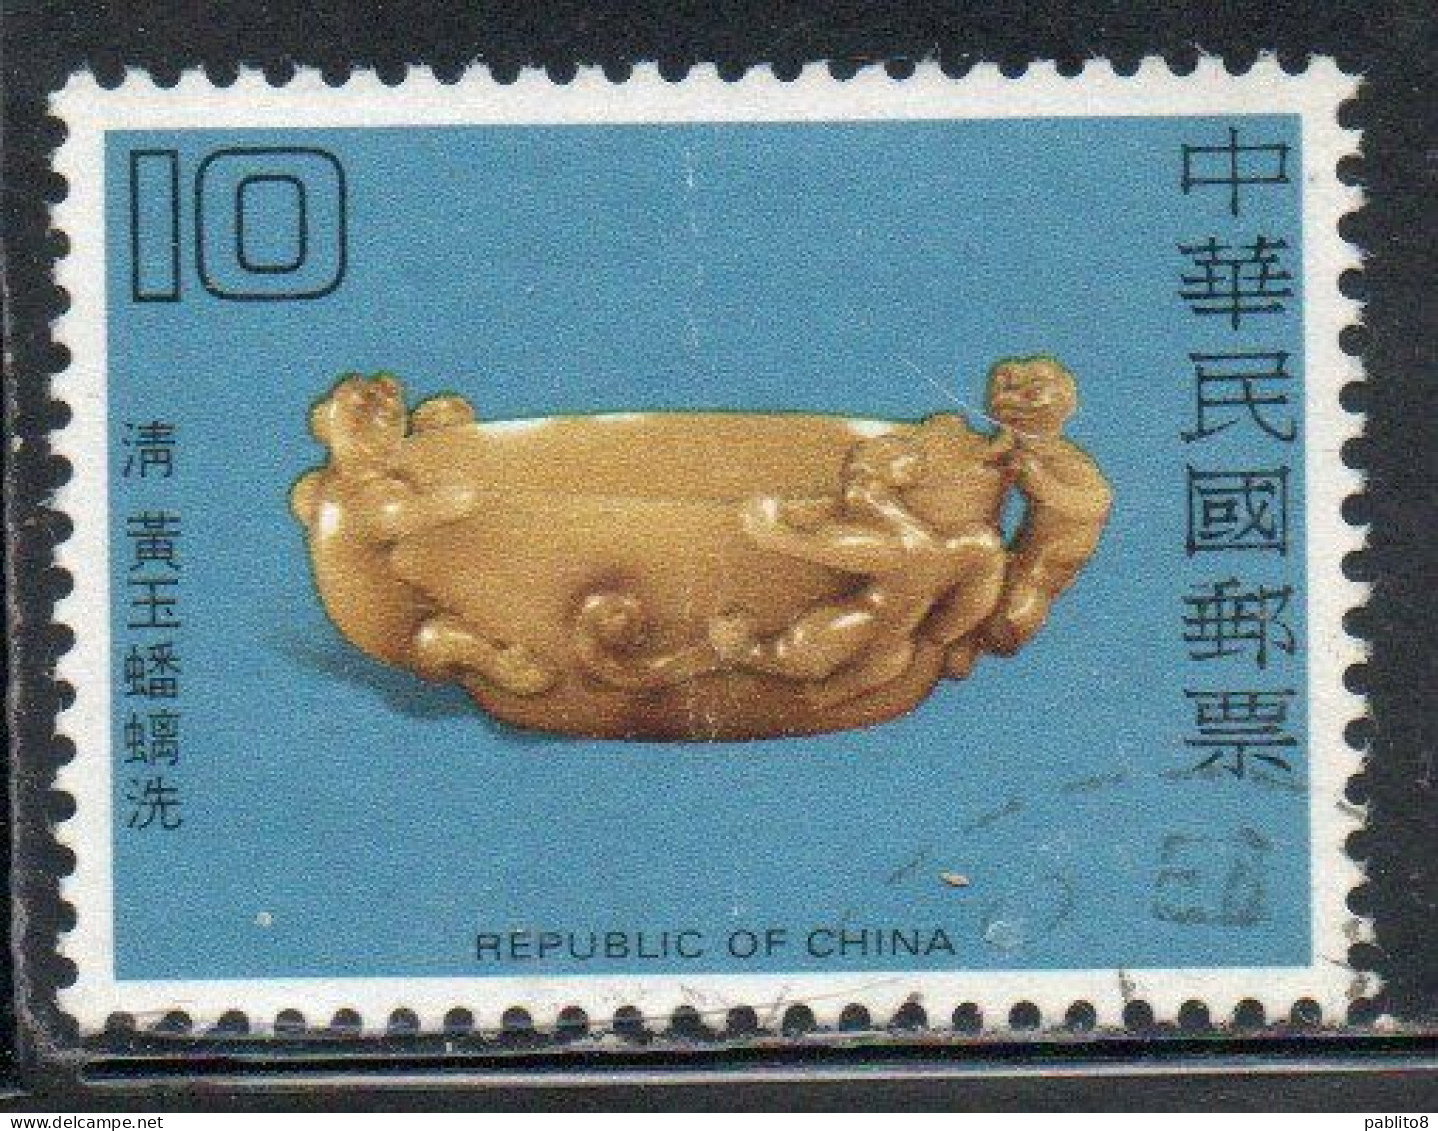 CHINA REPUBLIC CINA TAIWAN FORMOSA 1980 JADE POTTERY YELLOW BRUSH WASHER CH'ING DYNASTY 10$ USED USATO OBLITERE' - Gebraucht